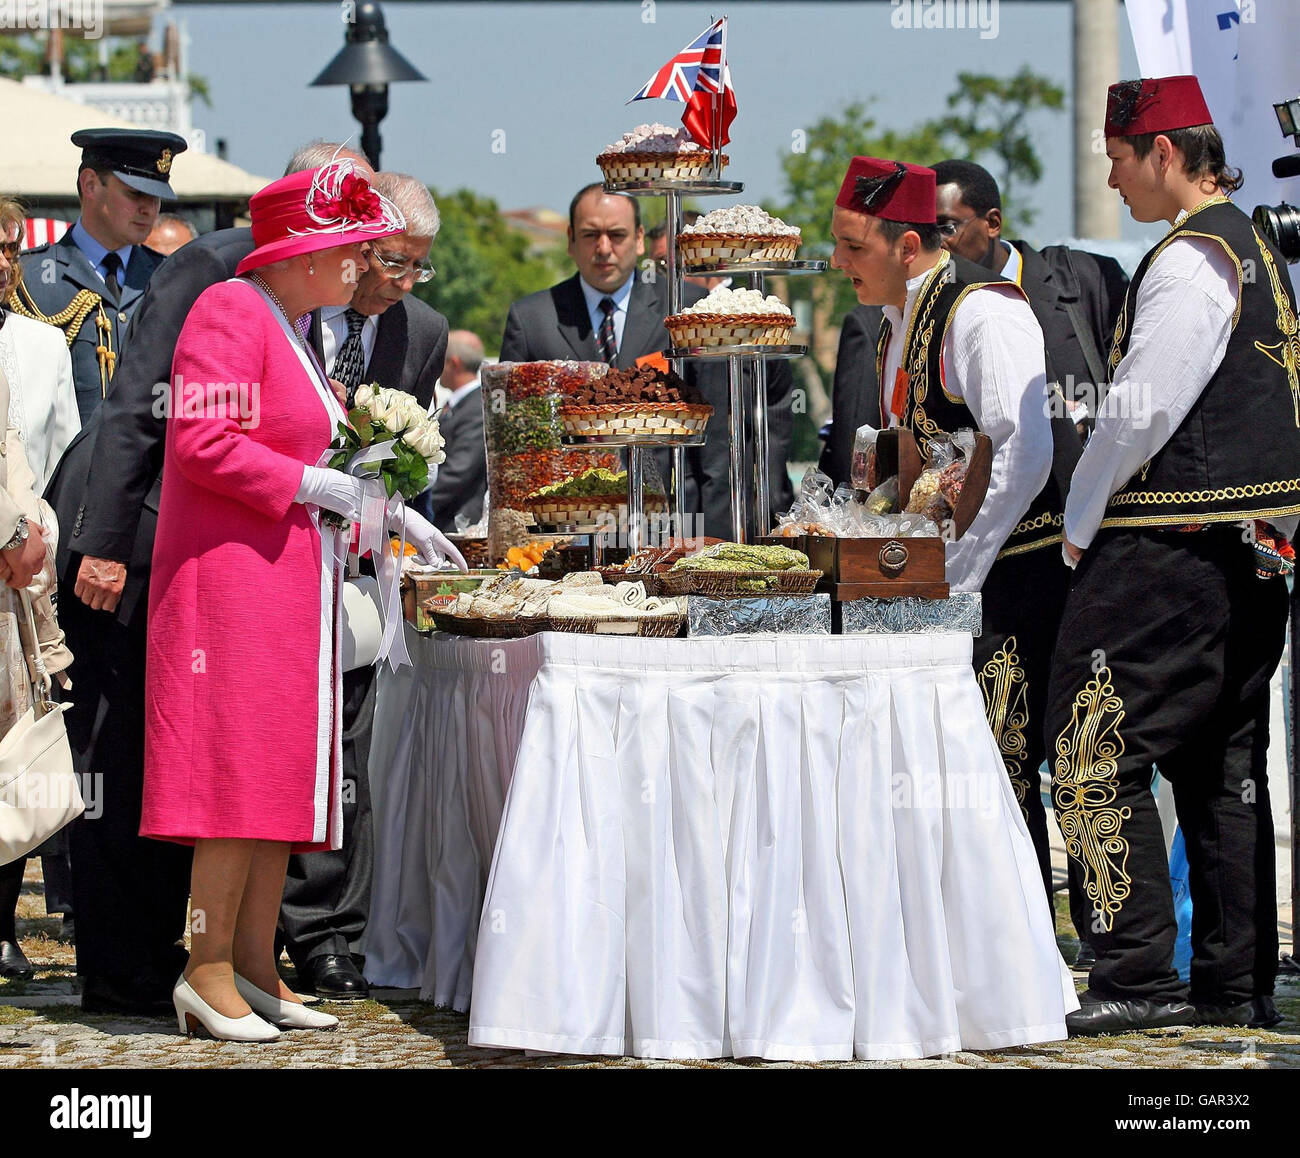 Britain's Queen Elizabeth II examines local food during a visit to Kabatas high school in Istanbul. It is the third day of the Queen's state visit to the Republic of Turkey. Stock Photo